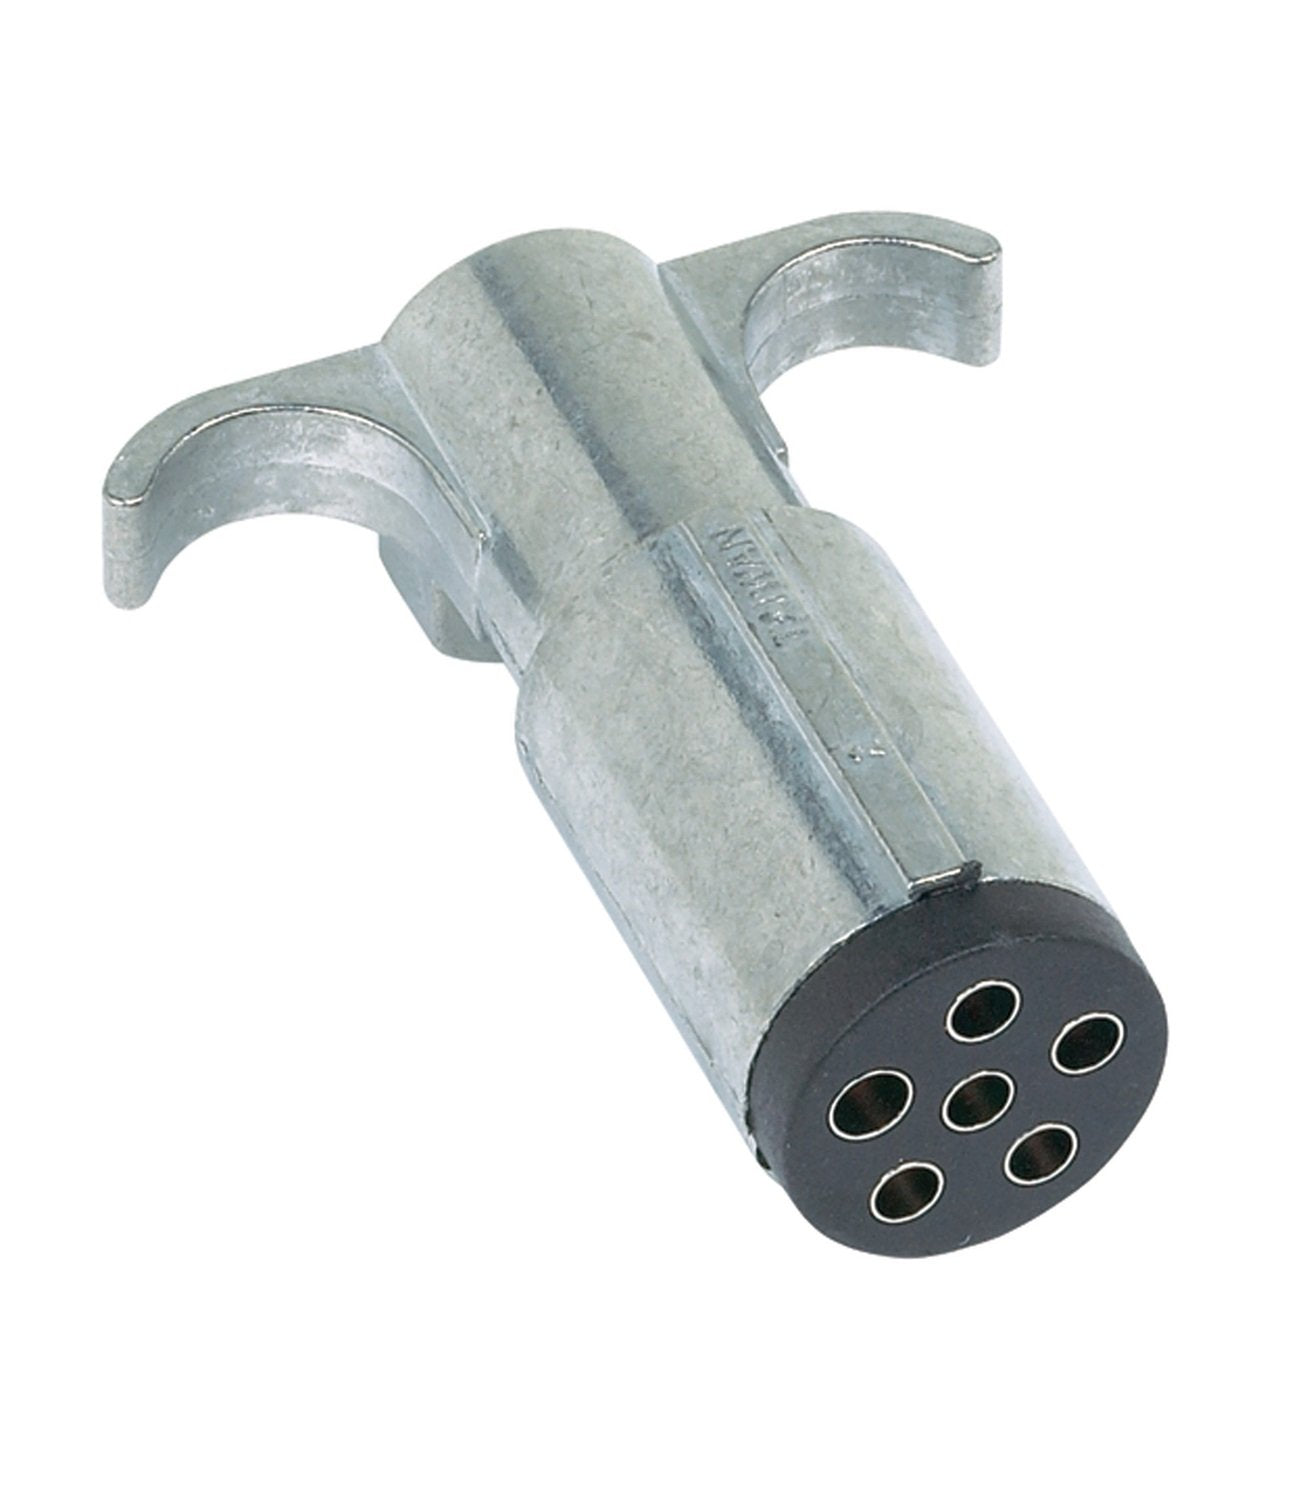 Hopkins Towing Solution 48445B 6-Pole Round Trailer End Connector Bulk 6-Pole Round Trailer End Connector